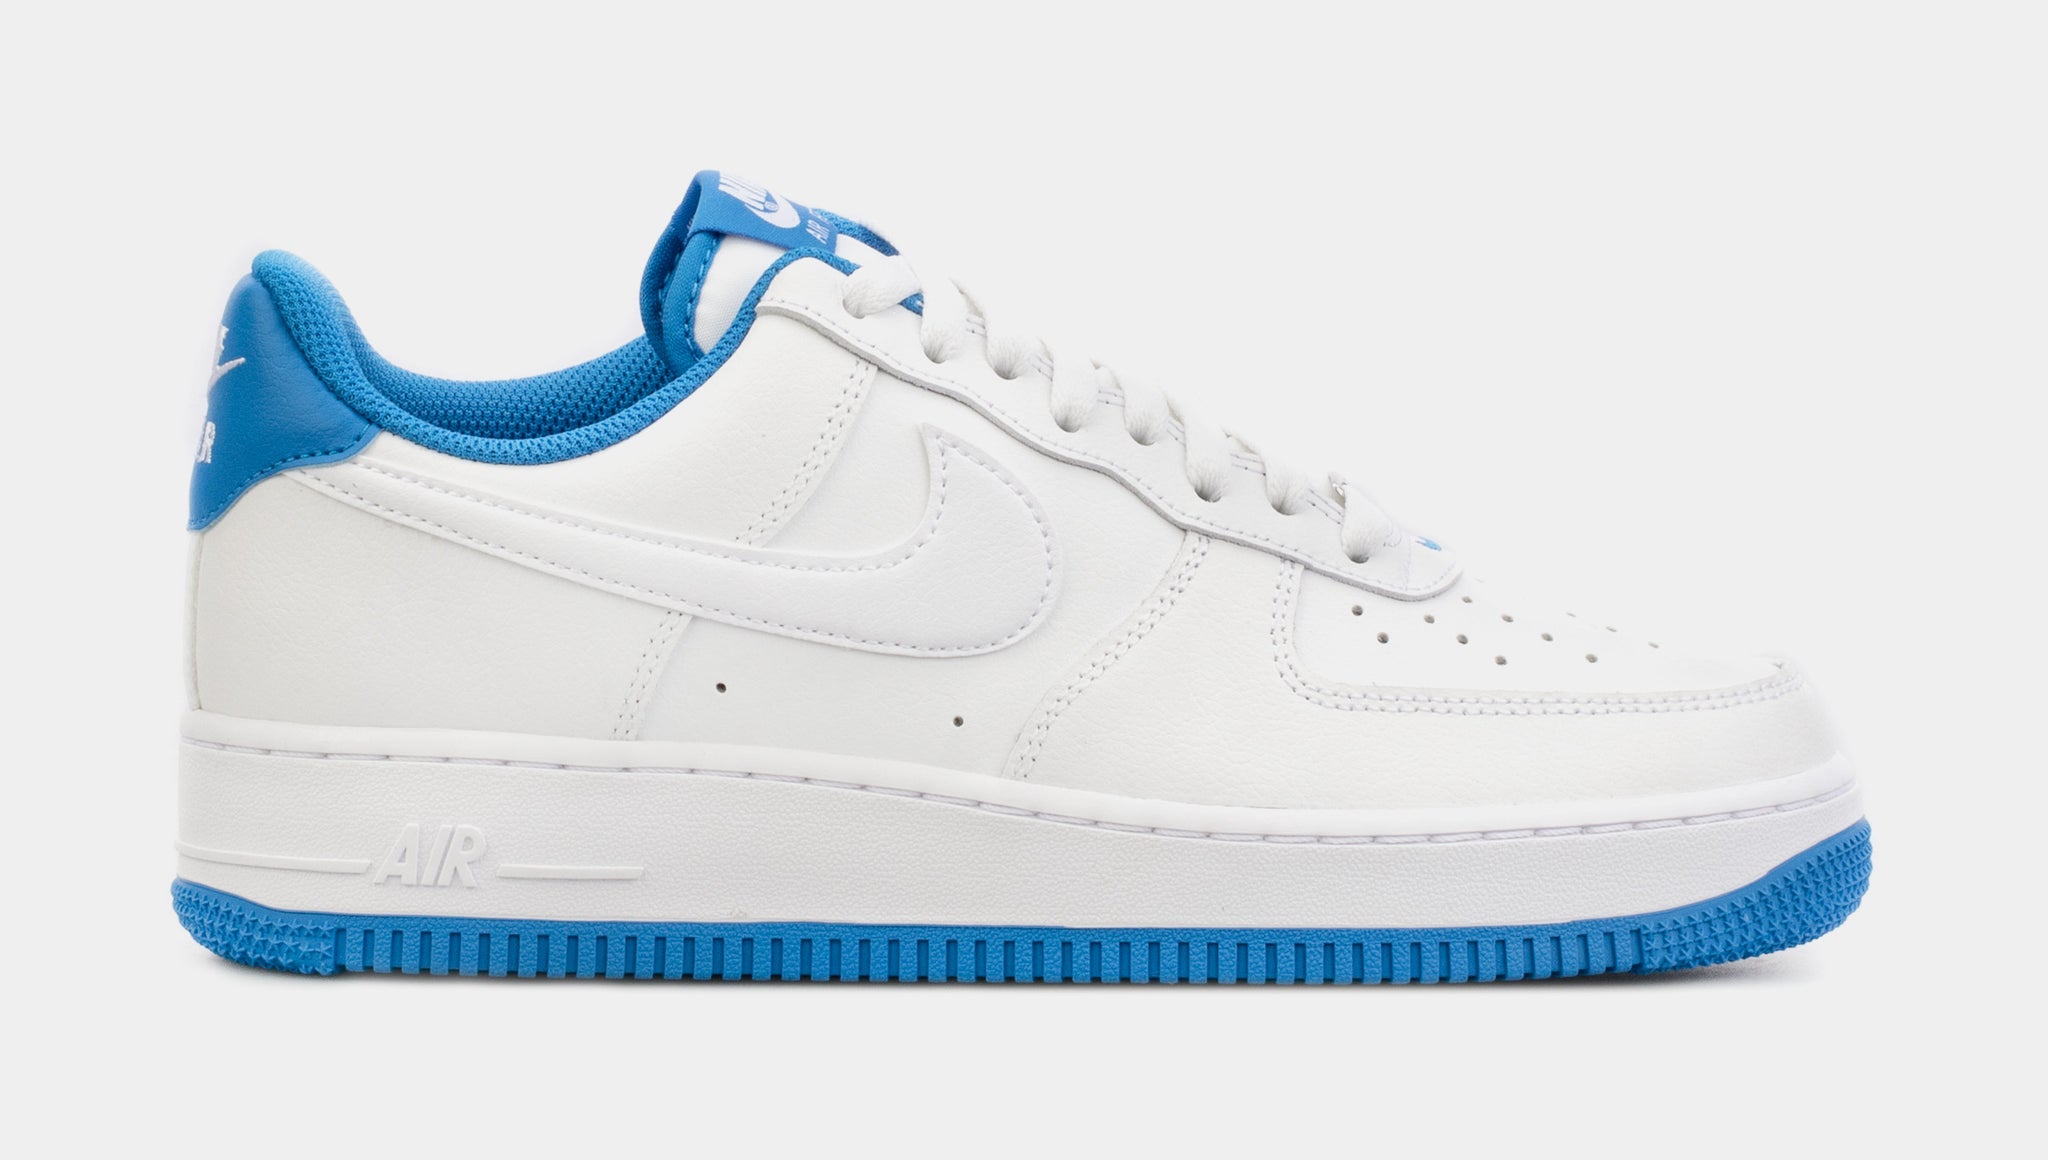 bodem Korting gips Nike Air Force 1 Low Pronto Blue Mens Lifestyle Shoes White Blue DR9867-101  – Shoe Palace